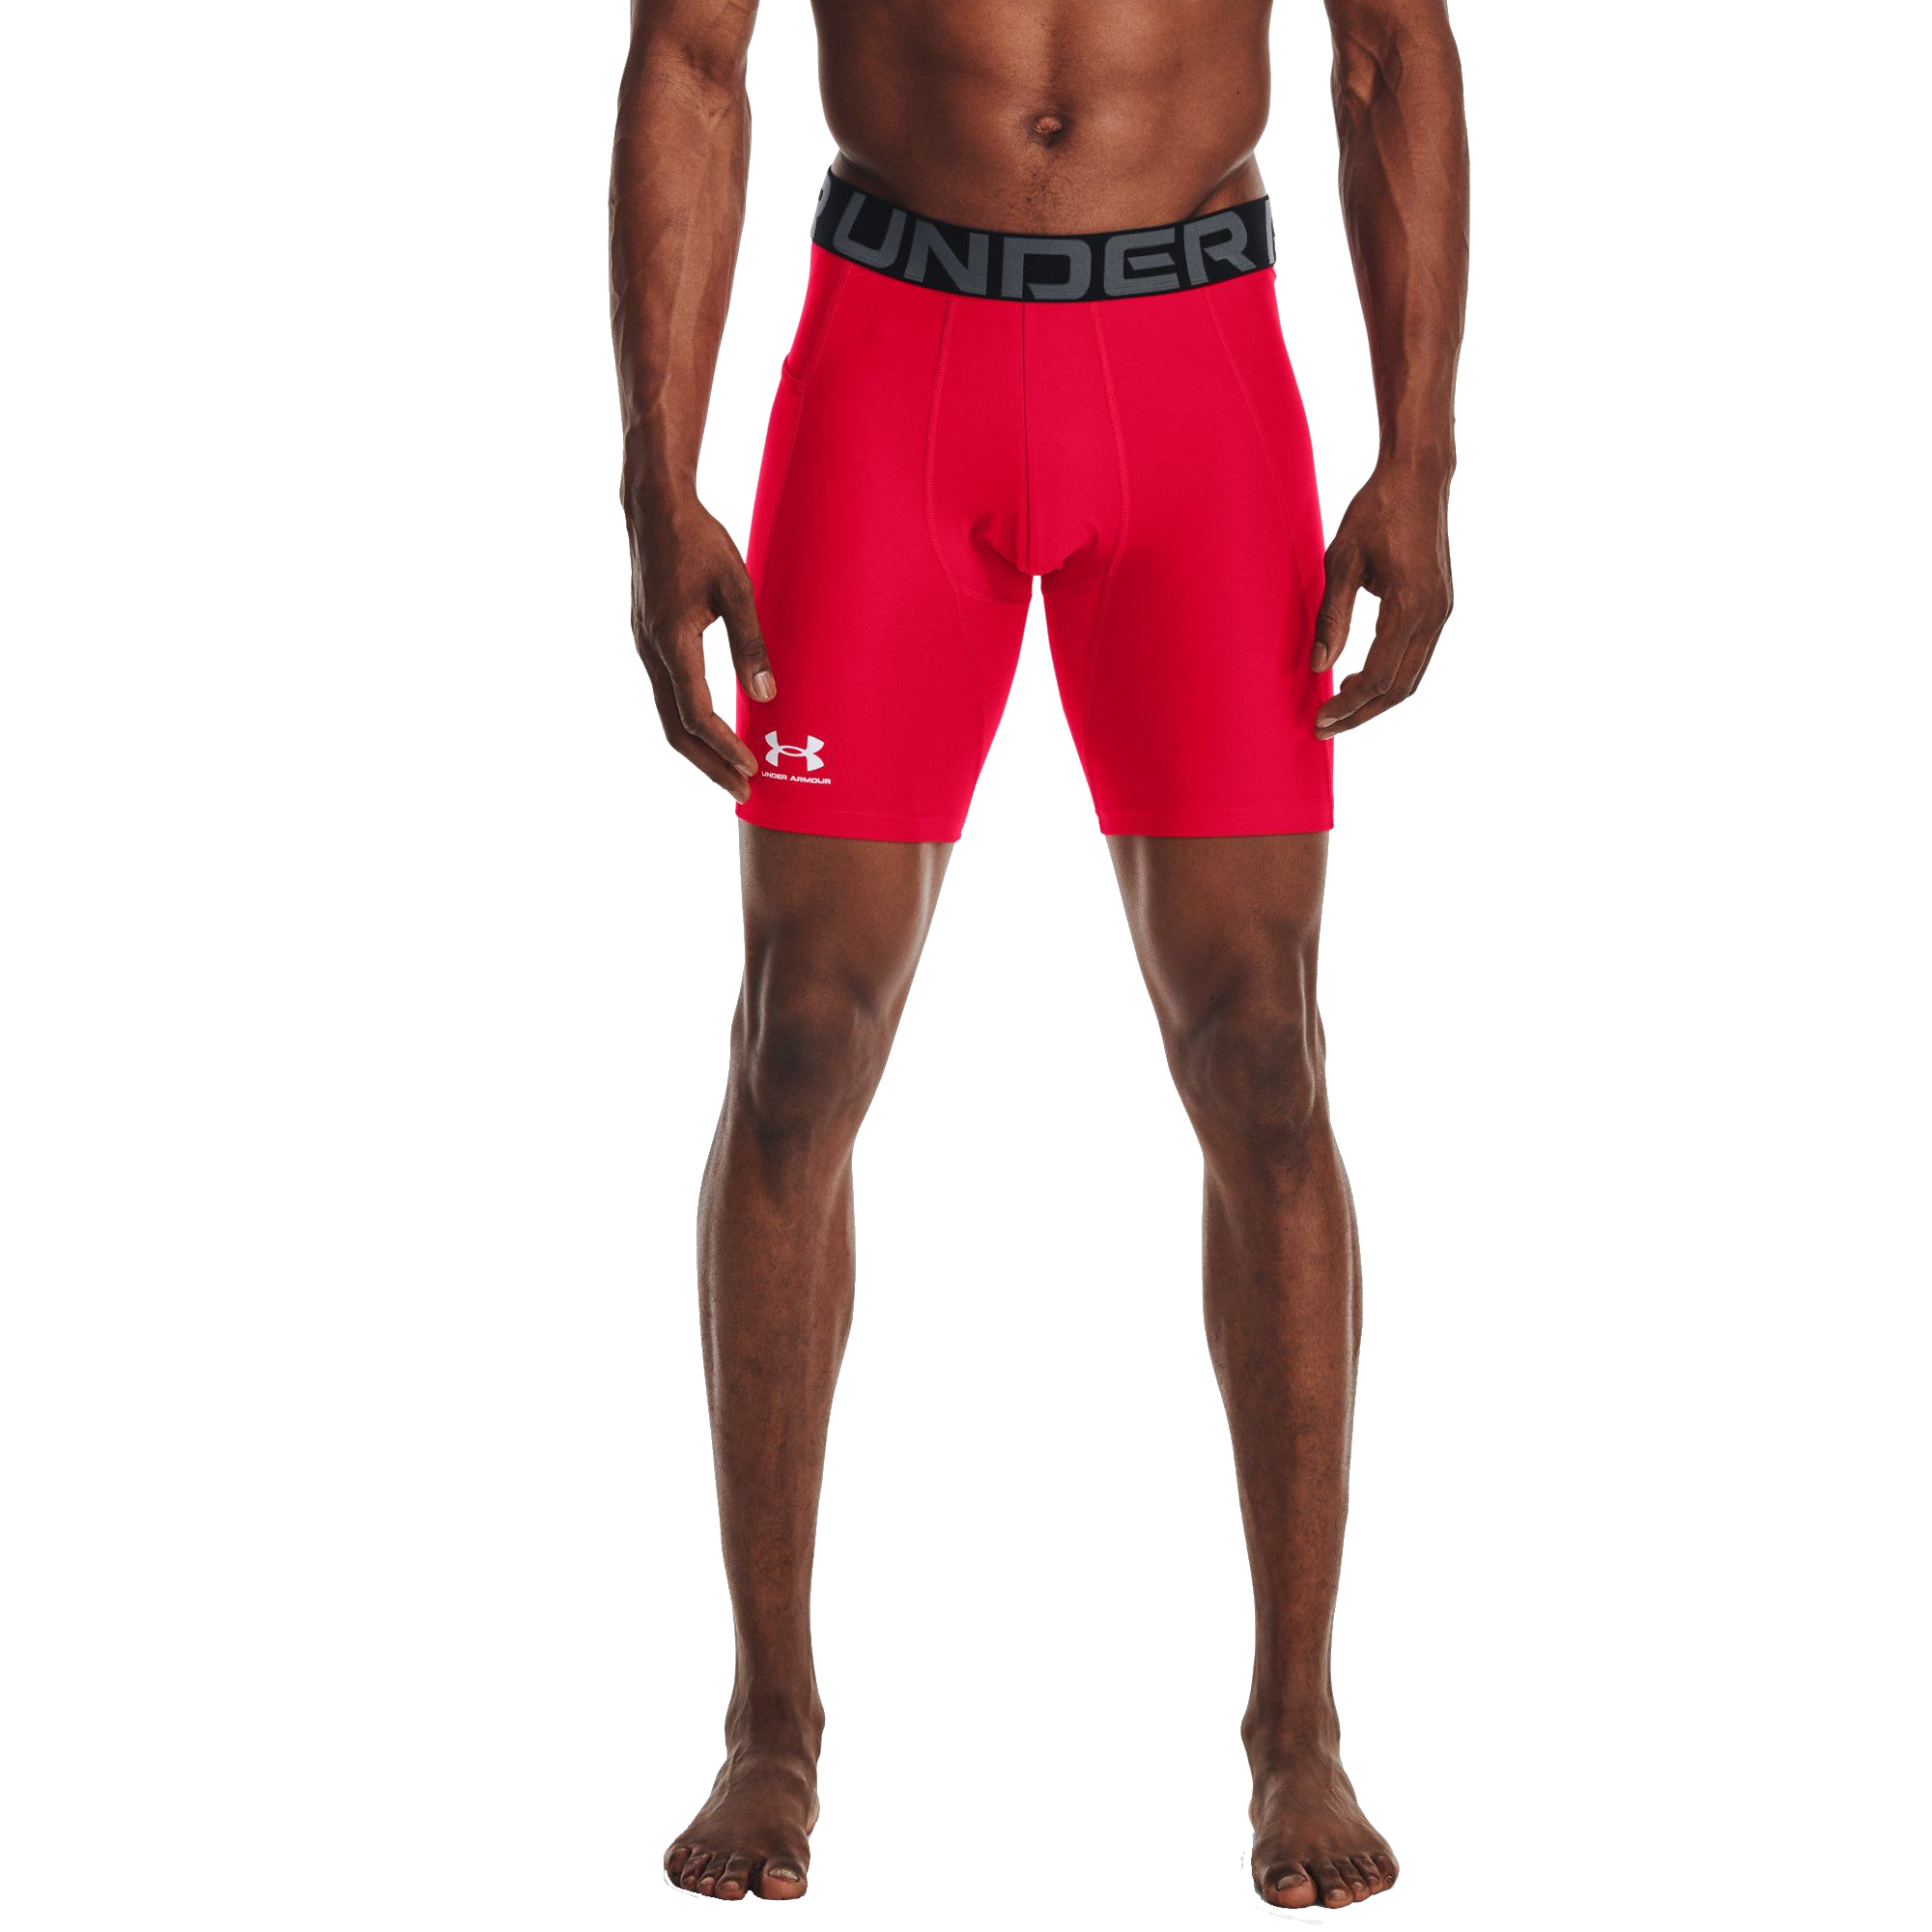 Under Armour HeatGear Armour Compression Shorts for Men - Red/White - XS